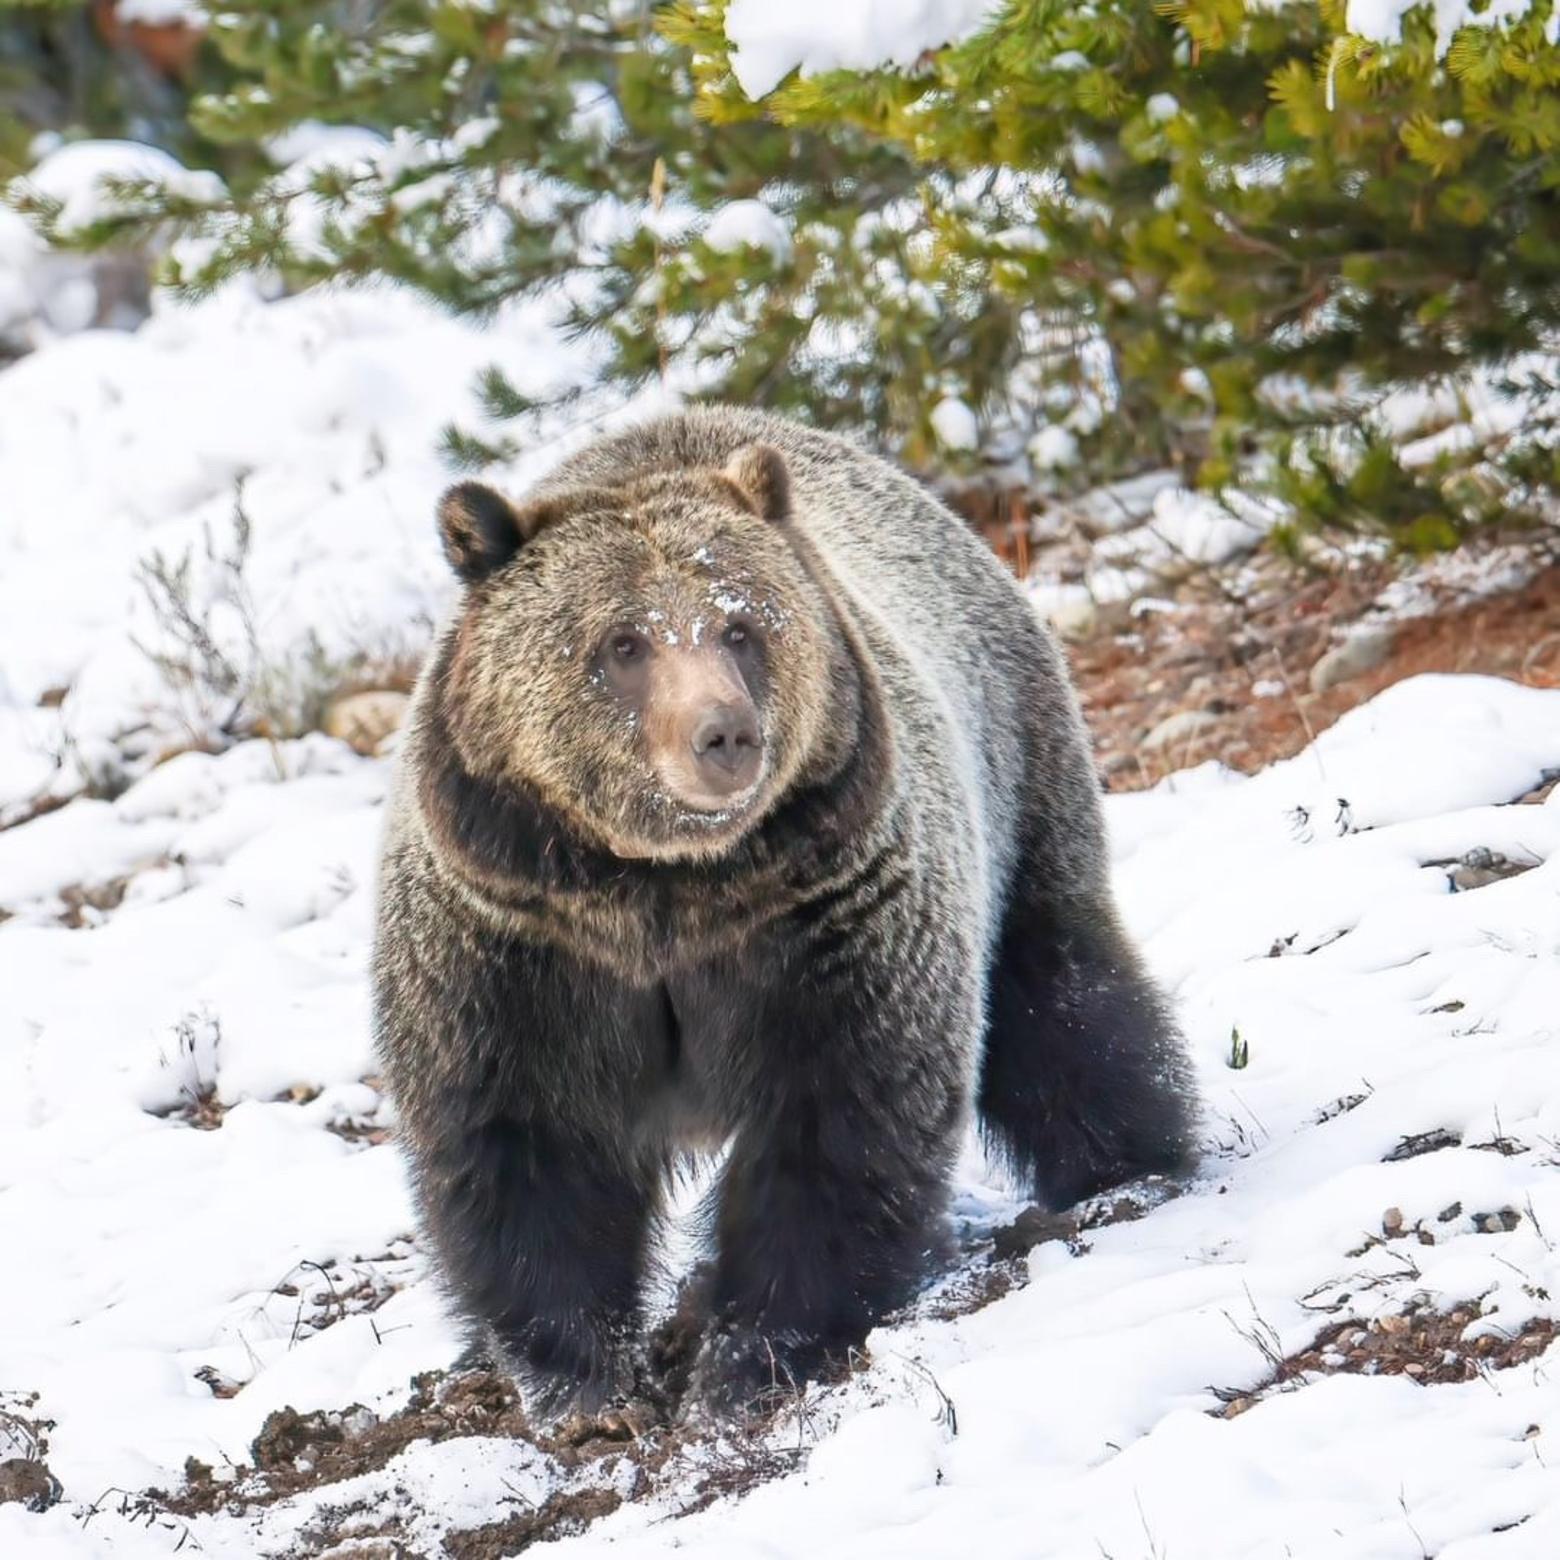 Facing the possibility of being removed from the Endangered Species List, Grizzly 1063 bulks up in Grand Teton National Park before hibernation last October. Photo by Ben Bluhm